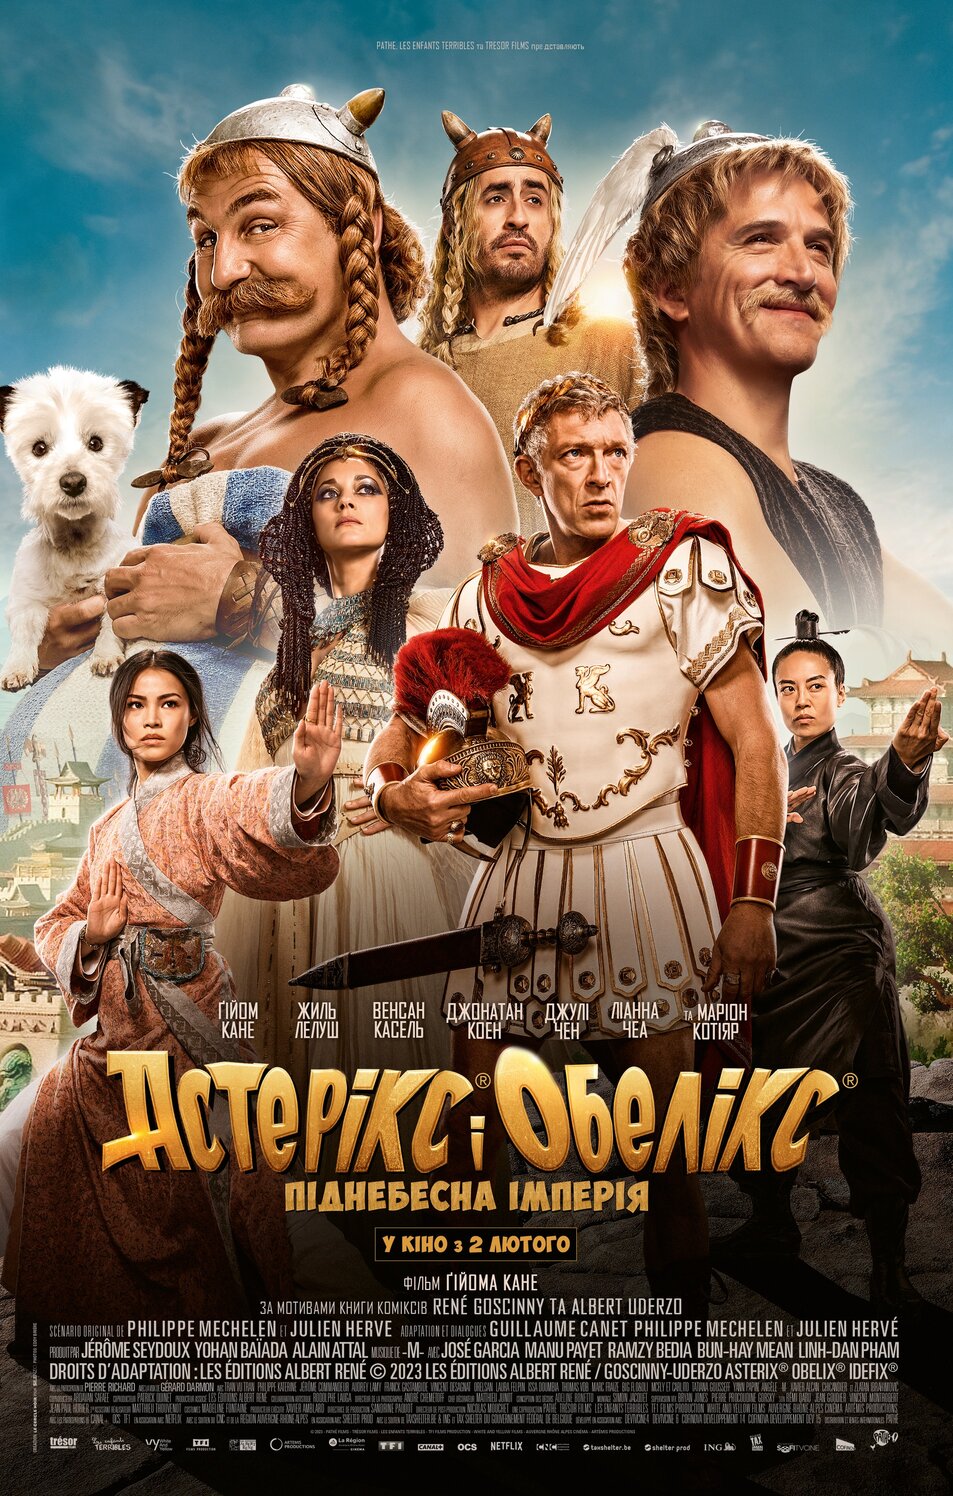 Asterix and Obelix: The Middle Kingdom 2023 Tamil Dubbed Adventure Movie Online